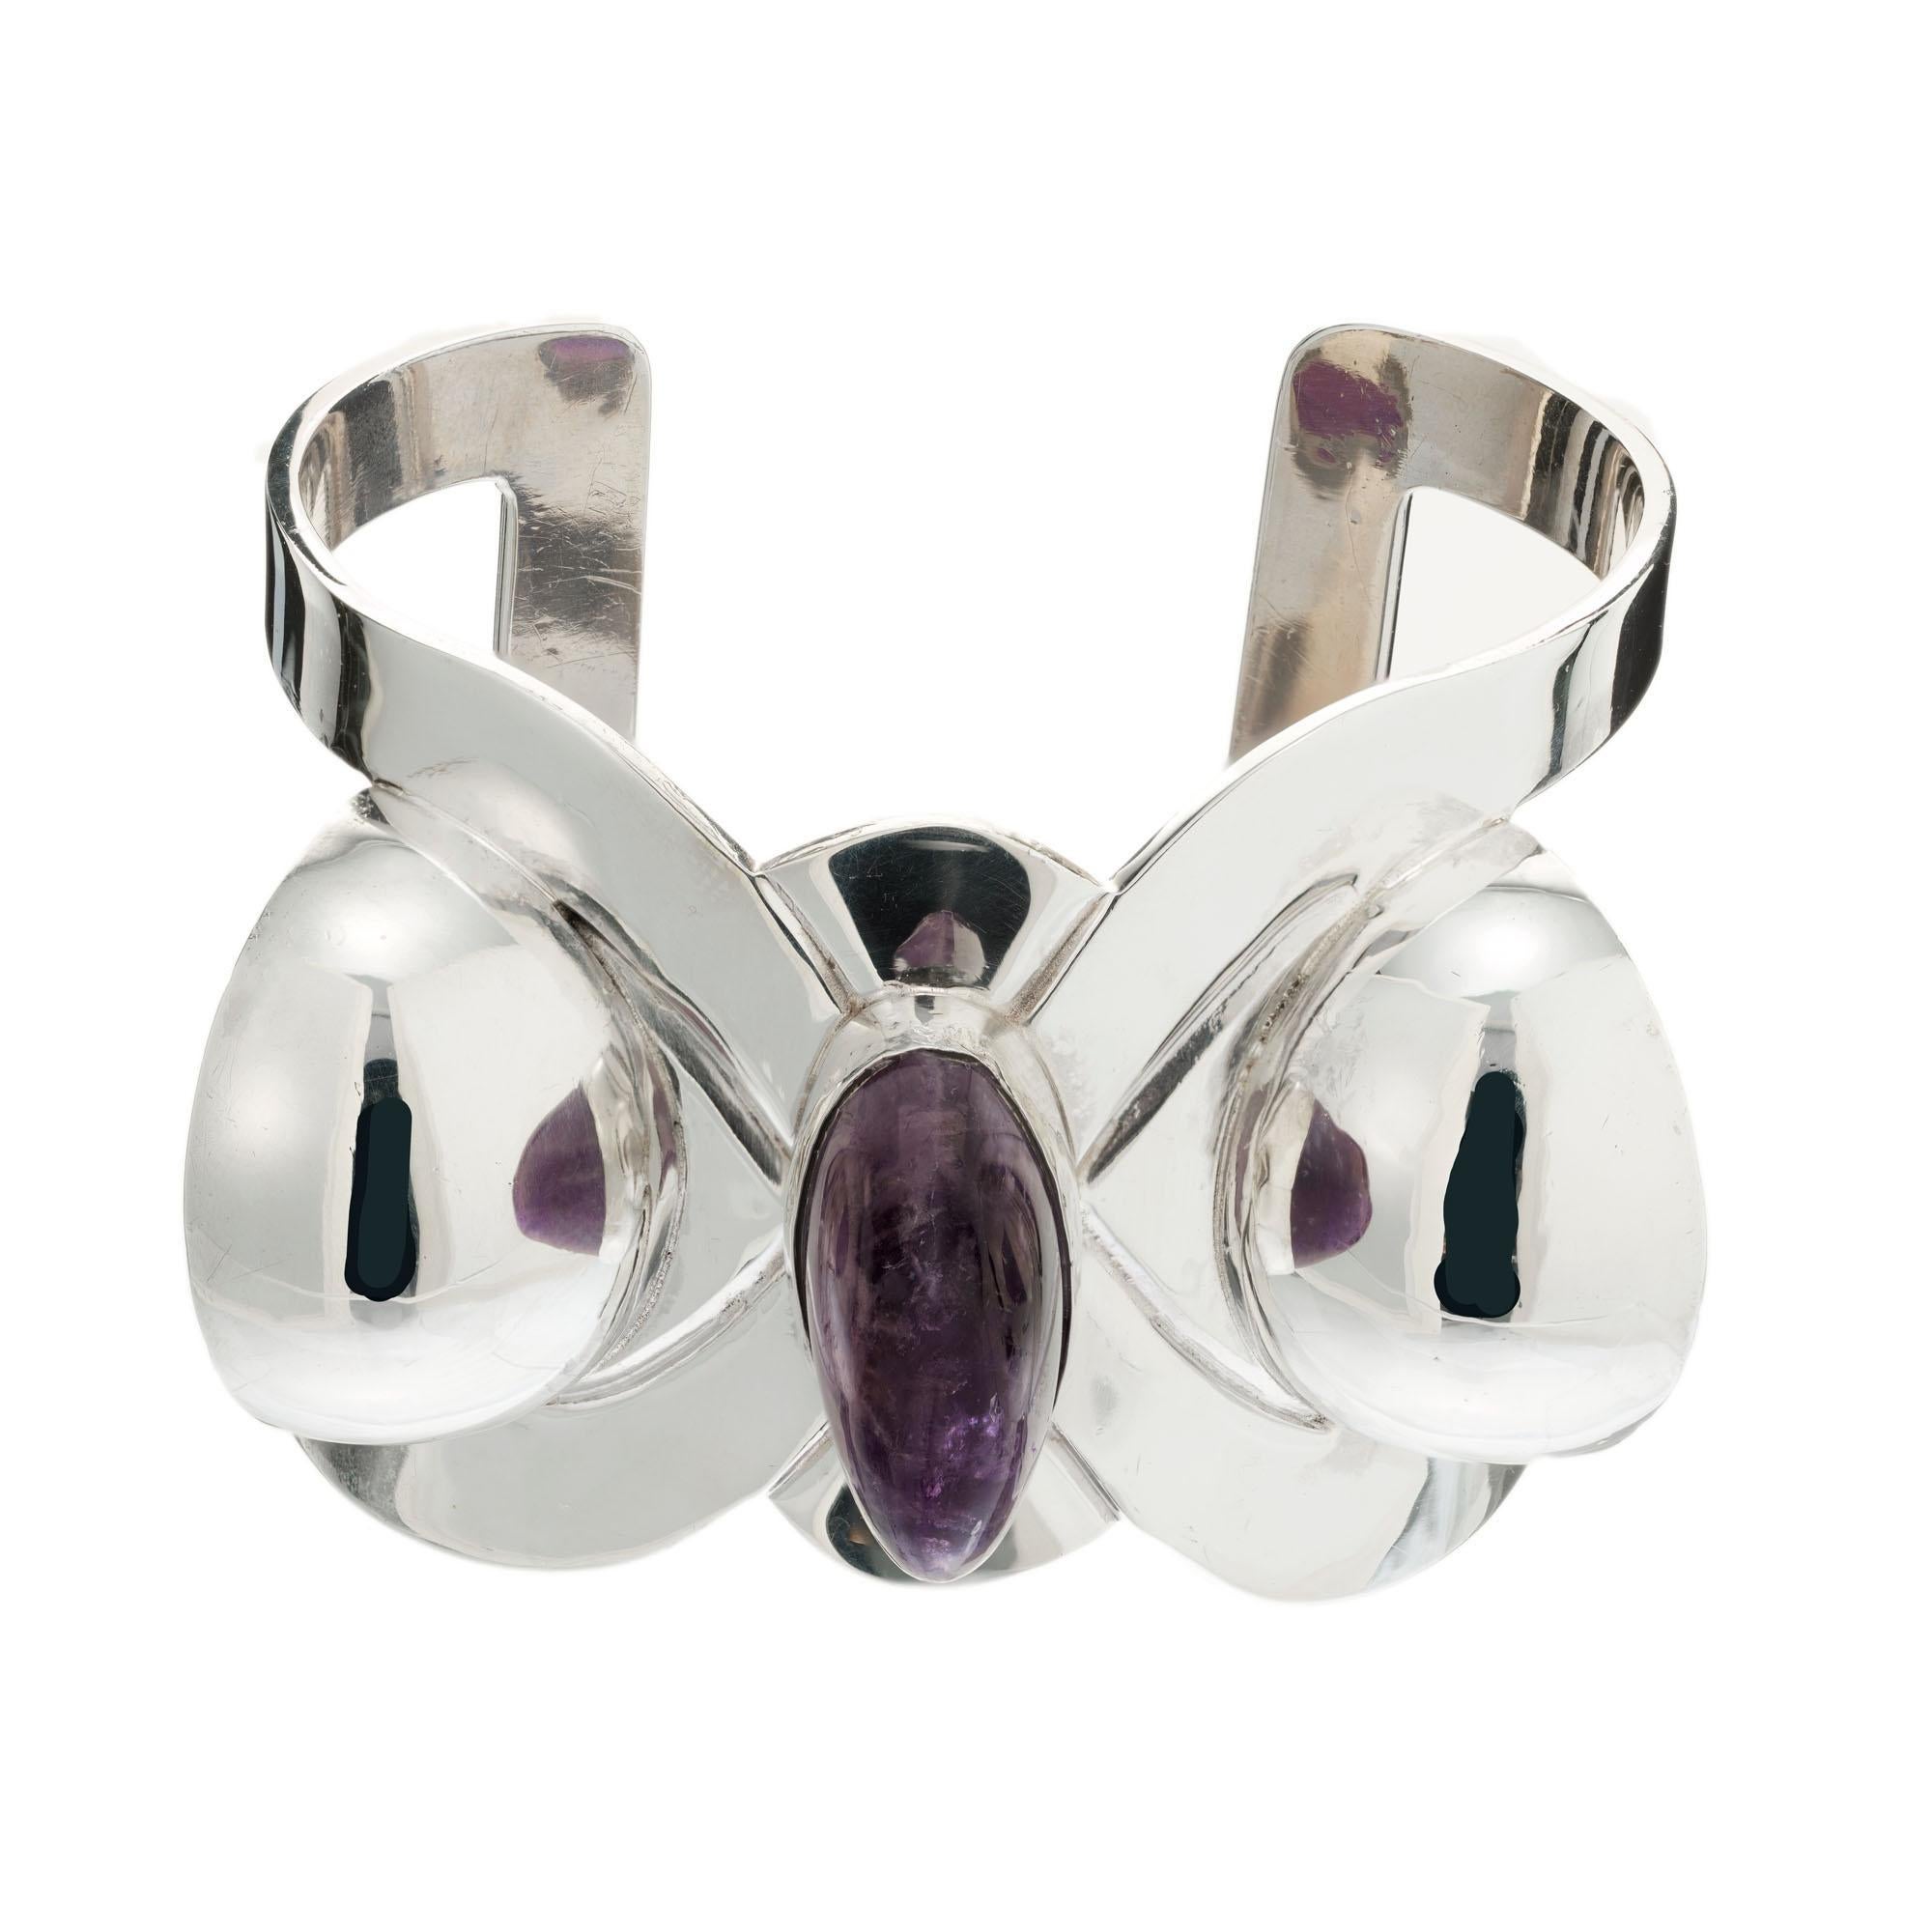 Vintage 1950's Hubert Harmon modernist Mexican sterling silver amethyst cuff bracelet. 3 Translucent natural cabochon amethyst with natural inclusions and no damage. Fits a 7 -7.5 Inch wrist.

1 oval purple muddled amethyst, approx. 35cts
2 round